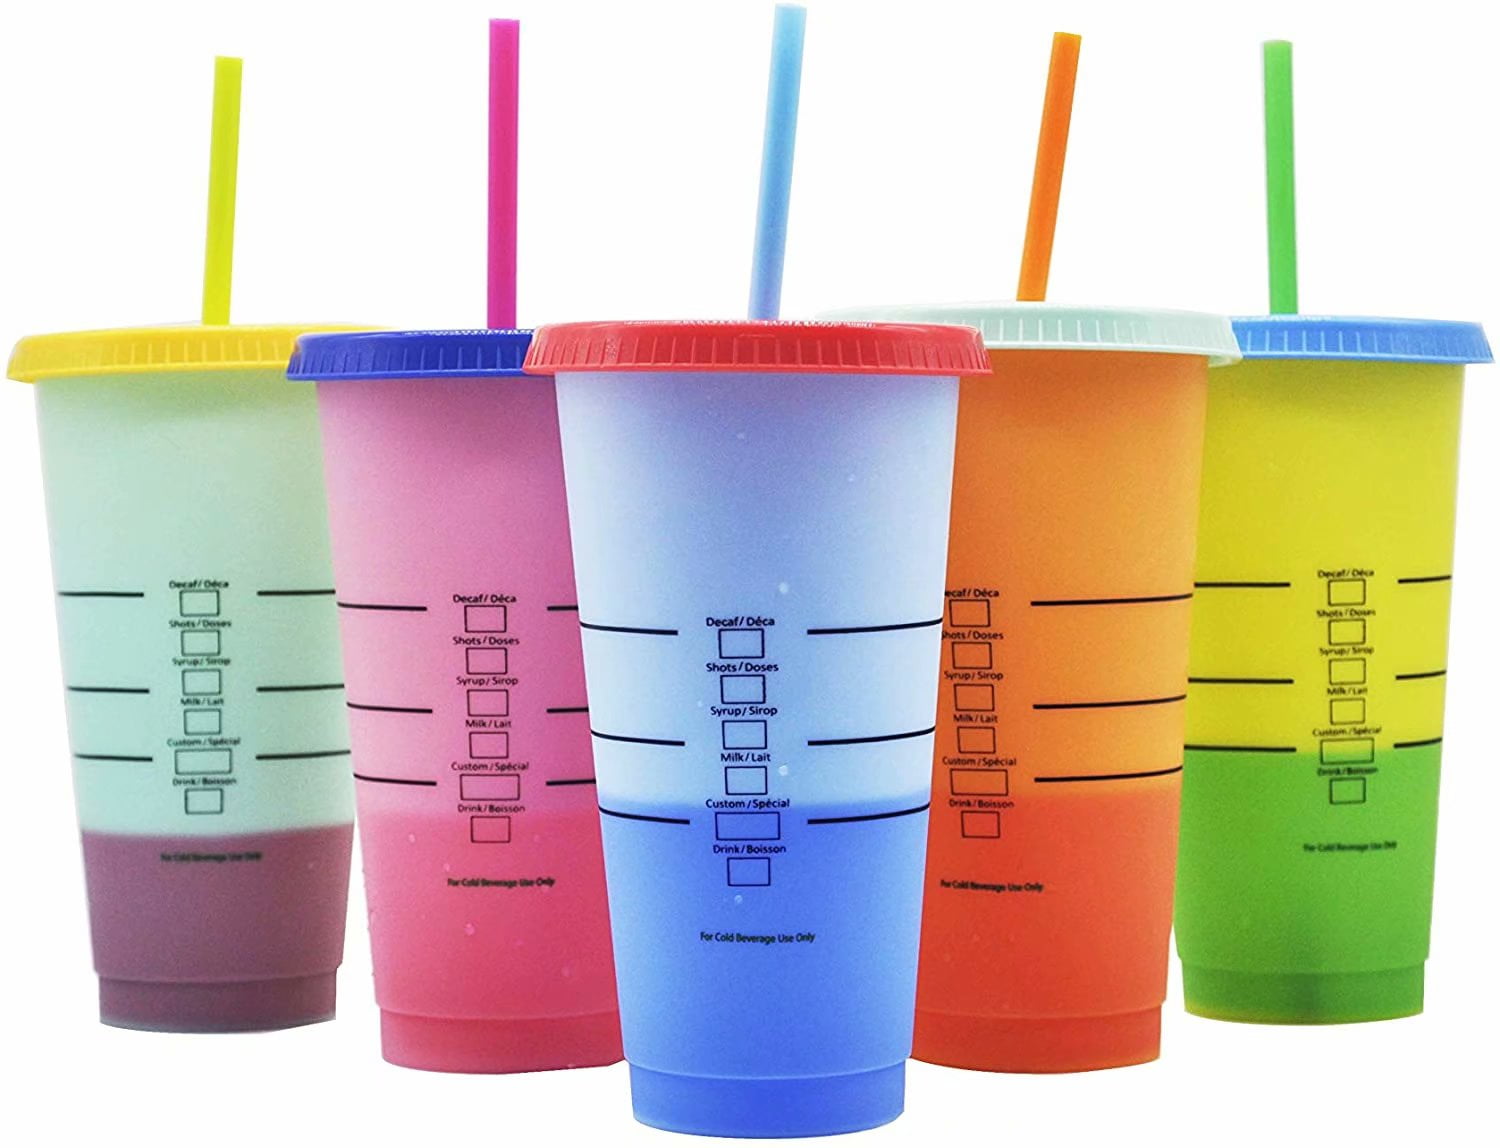 24oz Plastic Color Changing Cup PP Temperature Sensing Magic Drinking Cup  With Lid And Straw Candy Colors Reusable Coffee Mug From V_fashionlife,  $2.81